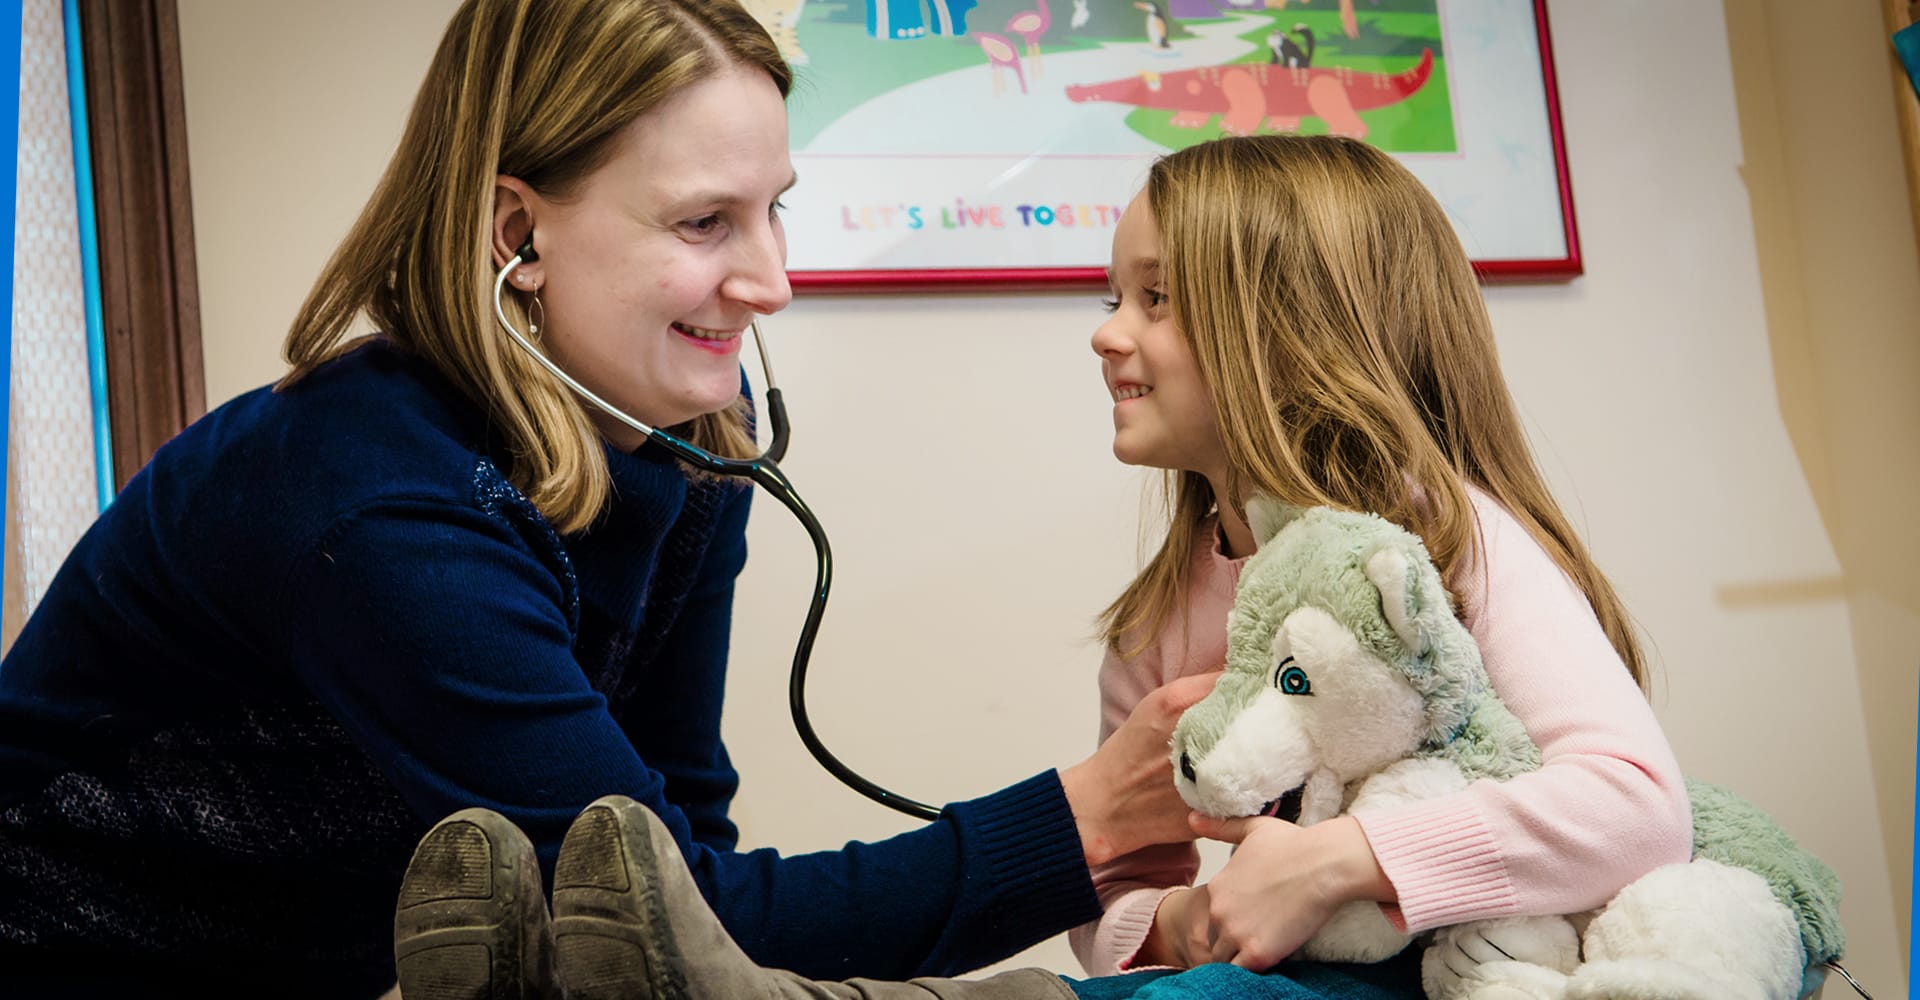 A health care provider using a stethoscope to listen to the chest of a young patient